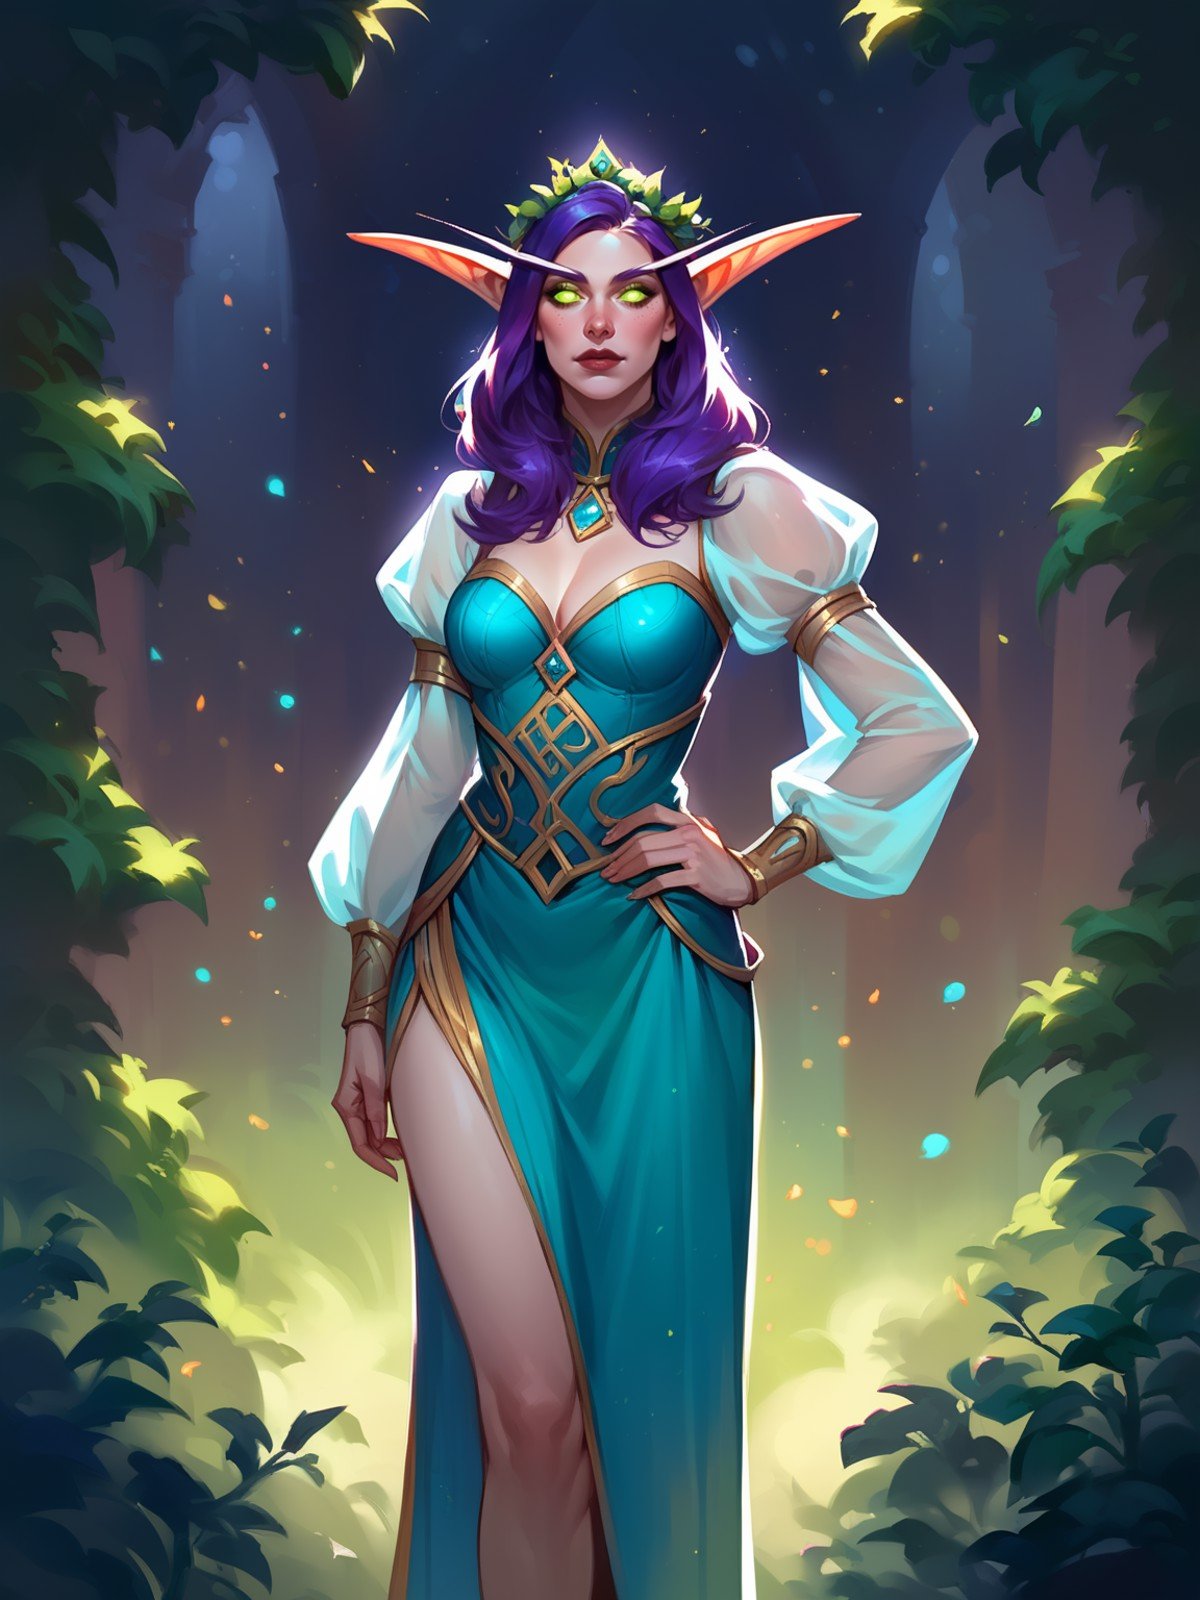 score_8_up, score_7_up, cowboy shot of beautiful elf queen, hand on hip, contrapposto, purple hair, ornate cyan dress with puffy sleeves, see-through sleeves, head wreath, particles, dark forest, ivy, vines, particles, night, fog fantasy, warcraft